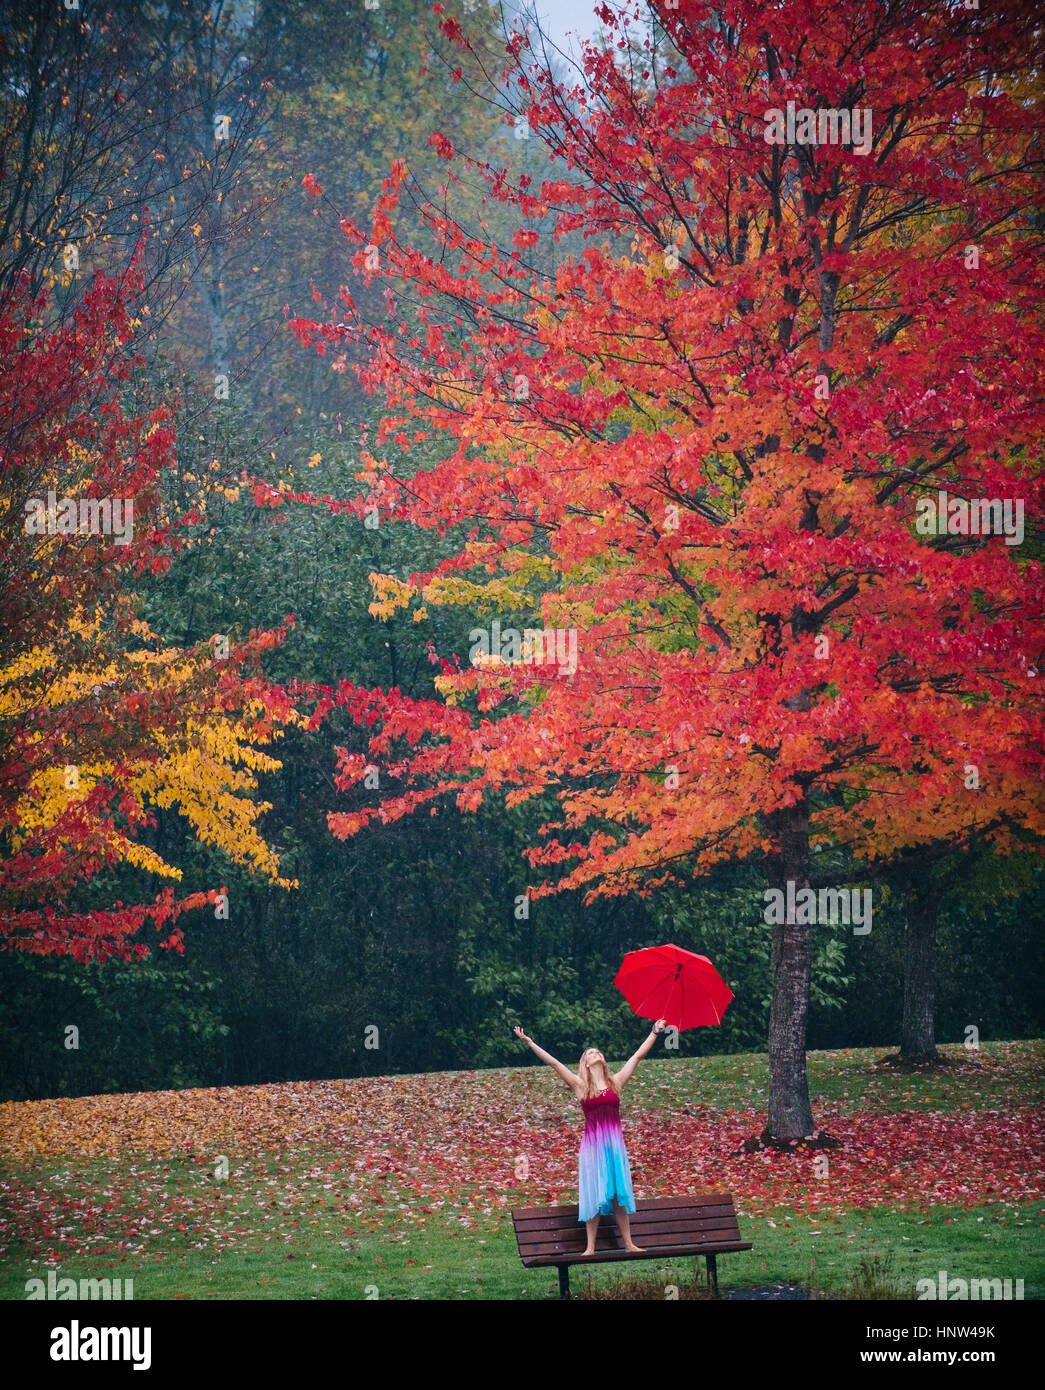 Caucasian woman holding umbrella in rain on park bench Banque D'Images